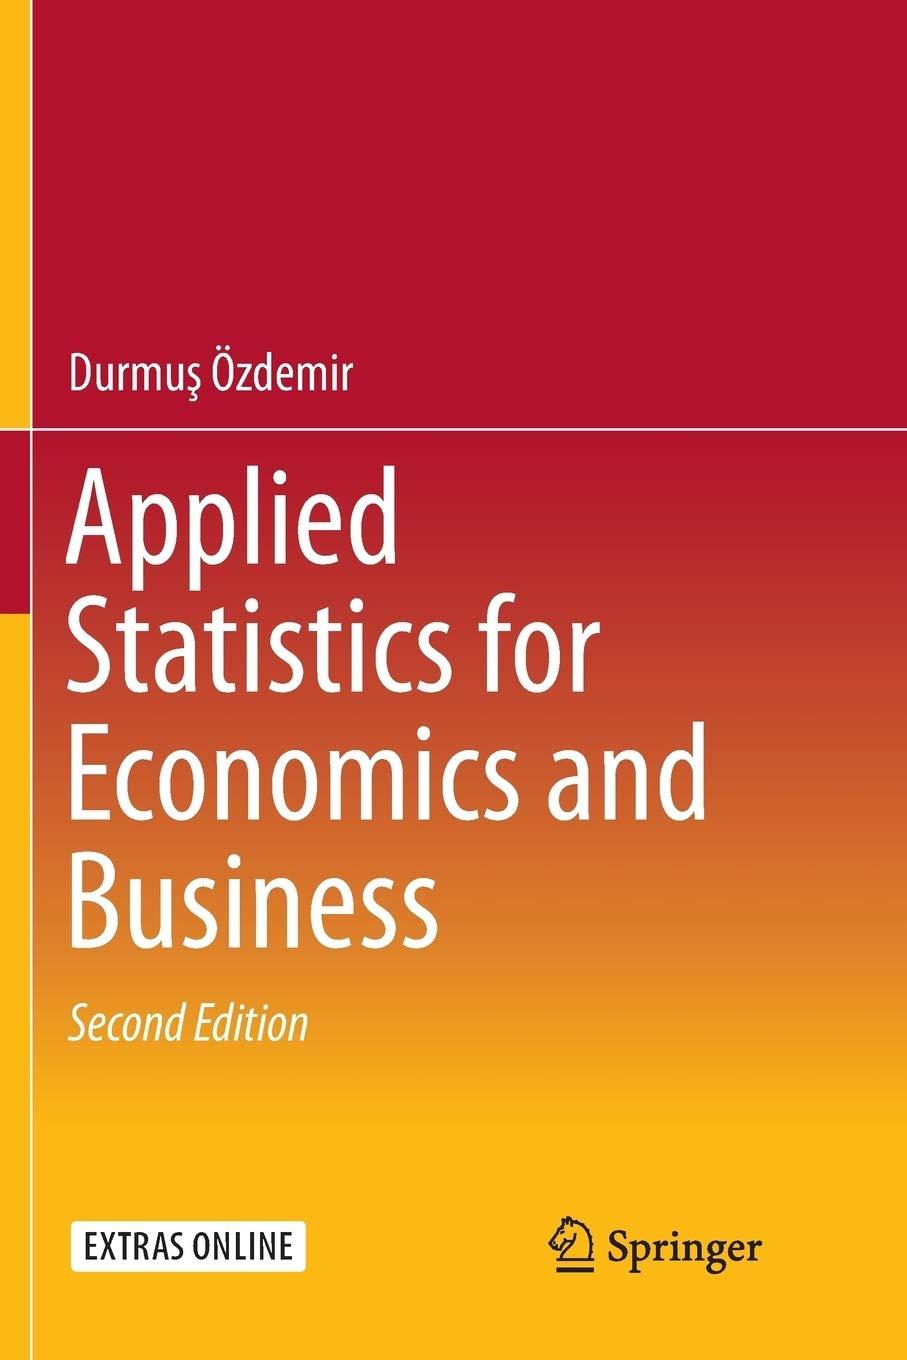 applied statistics for economics and business 2nd edition durmuş ozdemir 3319799622, 9783319799629